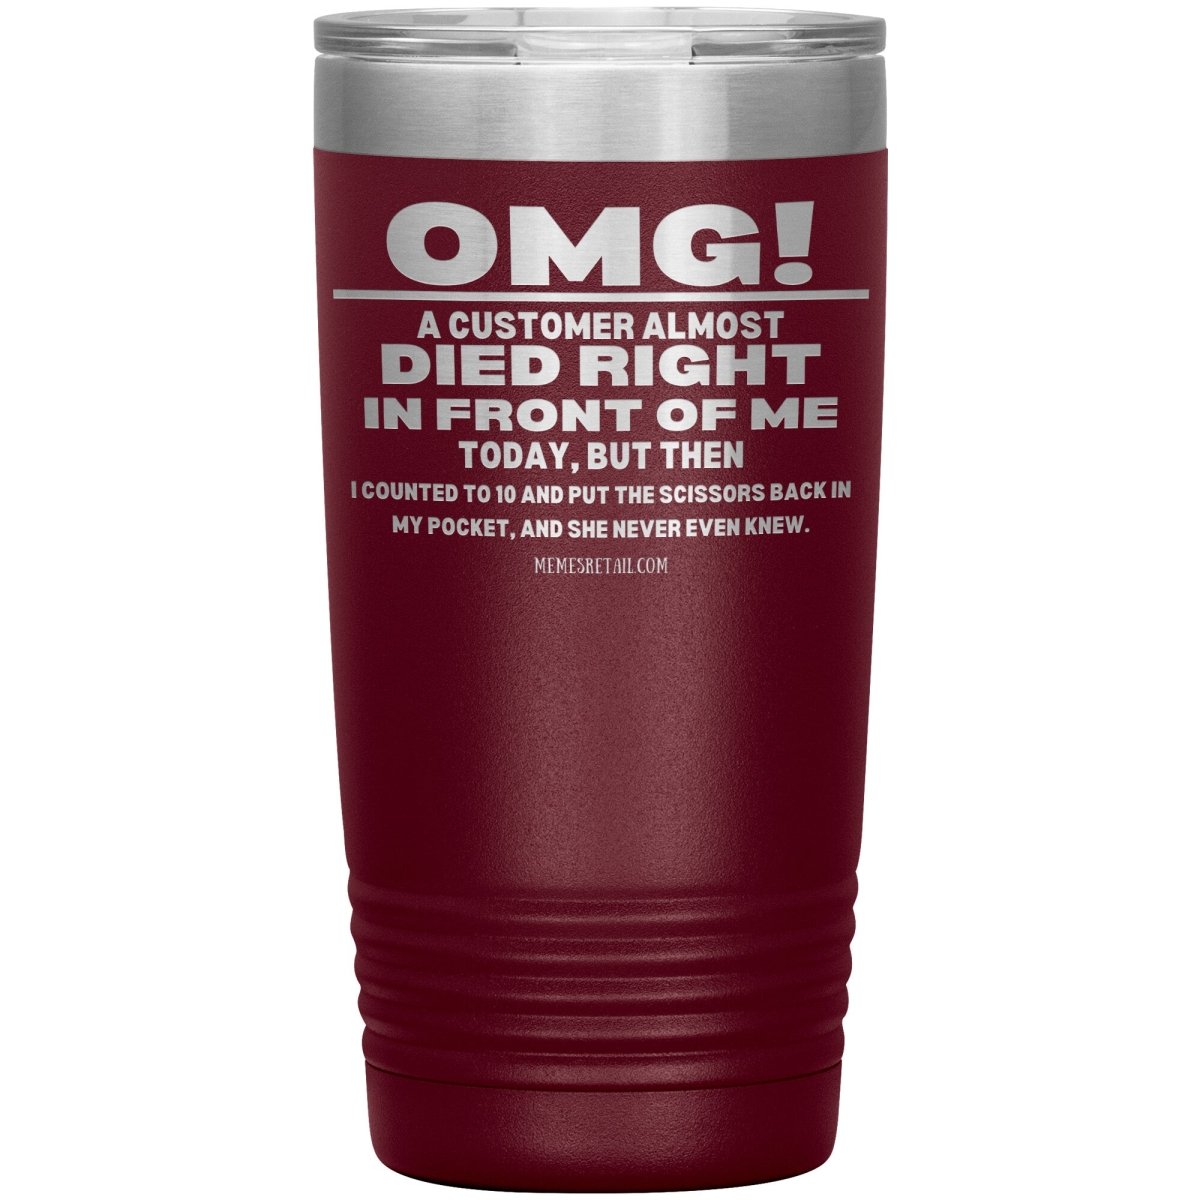 OMG! A Customer Almost Died Right In Front Of Me Tumbler, 20oz Insulated Tumbler / Maroon - MemesRetail.com